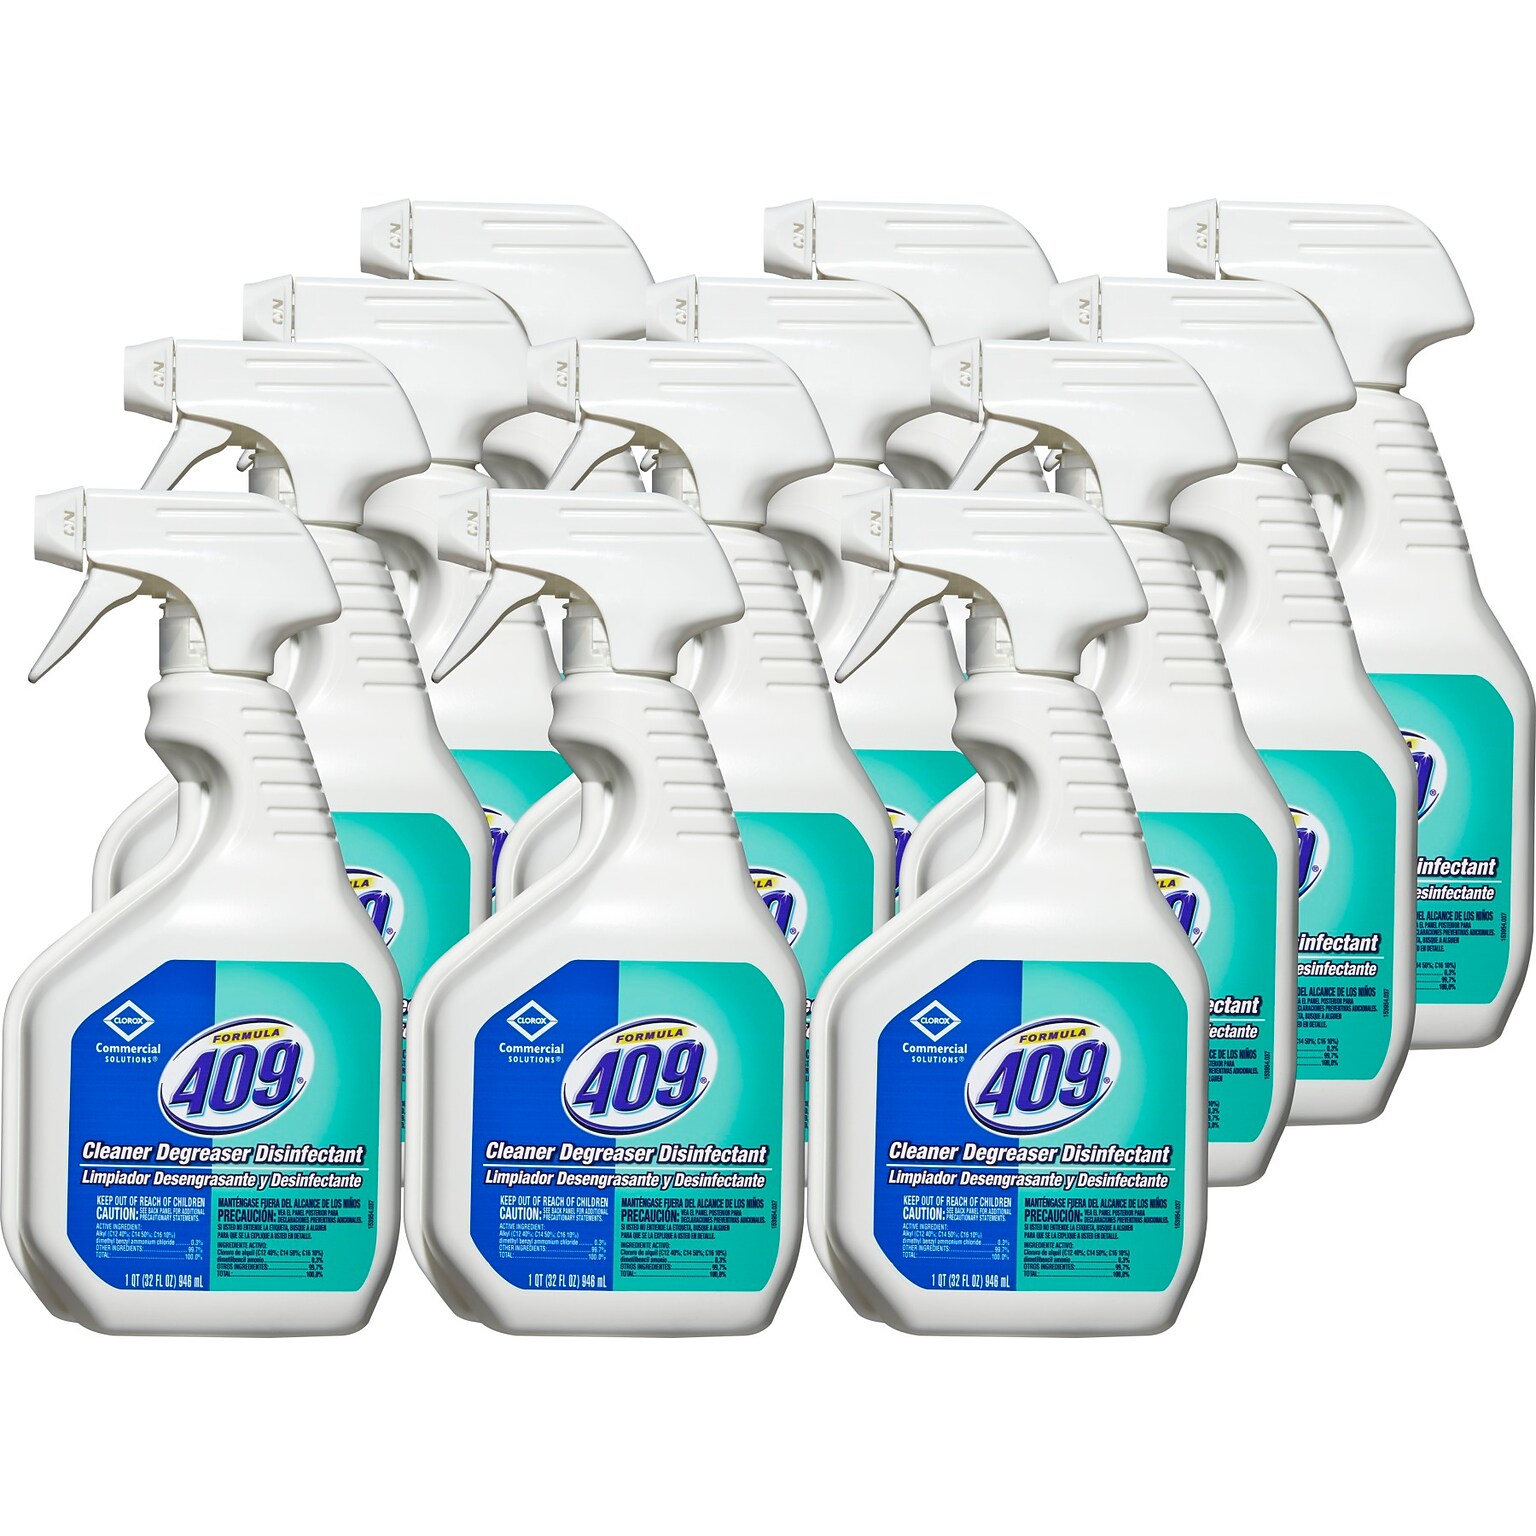 Clorox Commercial Solutions® Formula 409® Cleaner Degreaser Disinfectant Spray, 32 Ounces Each (Pack of 12) (35306)